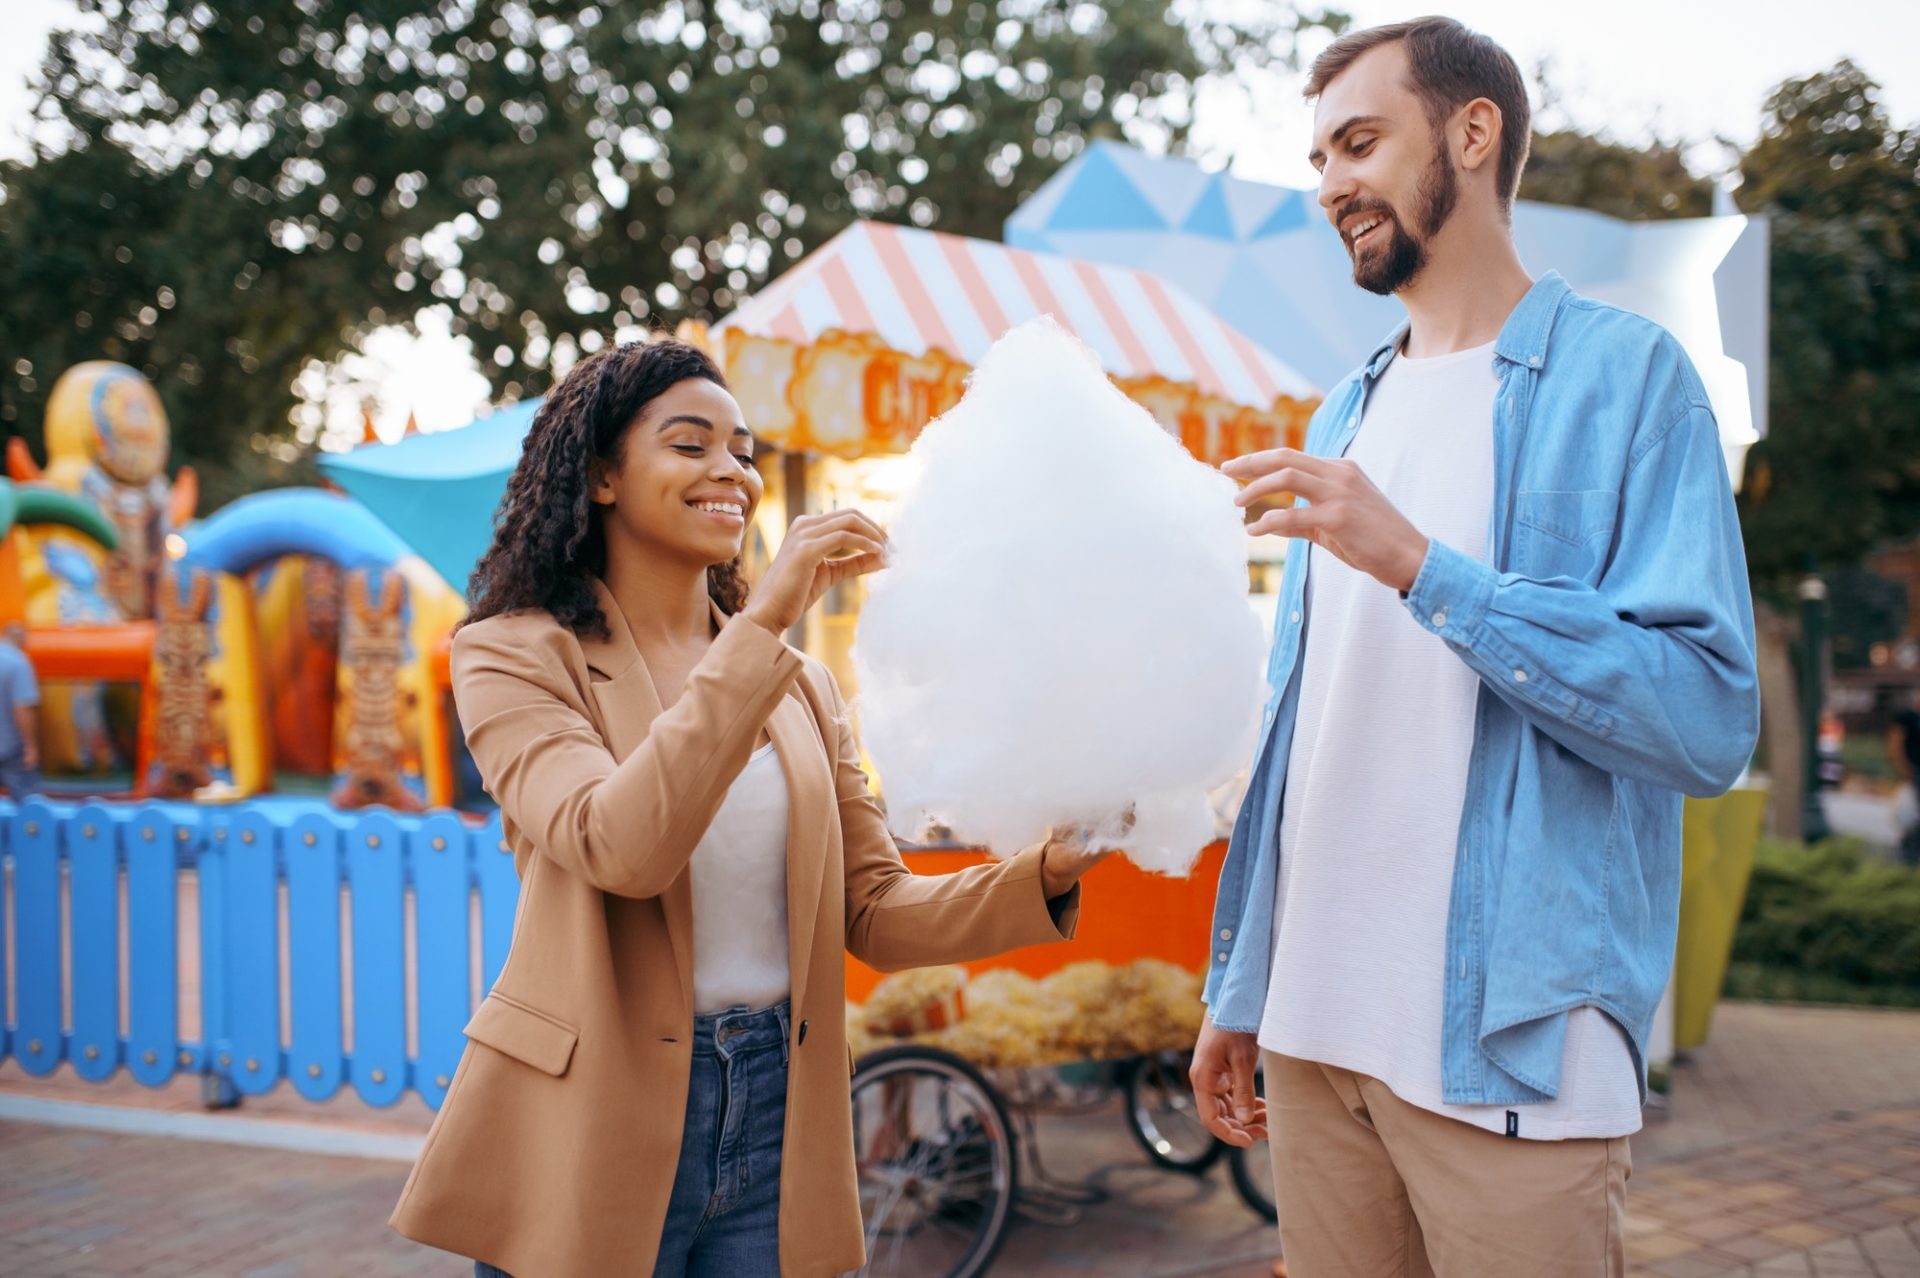 Love couple eating cotton candy in amusement park